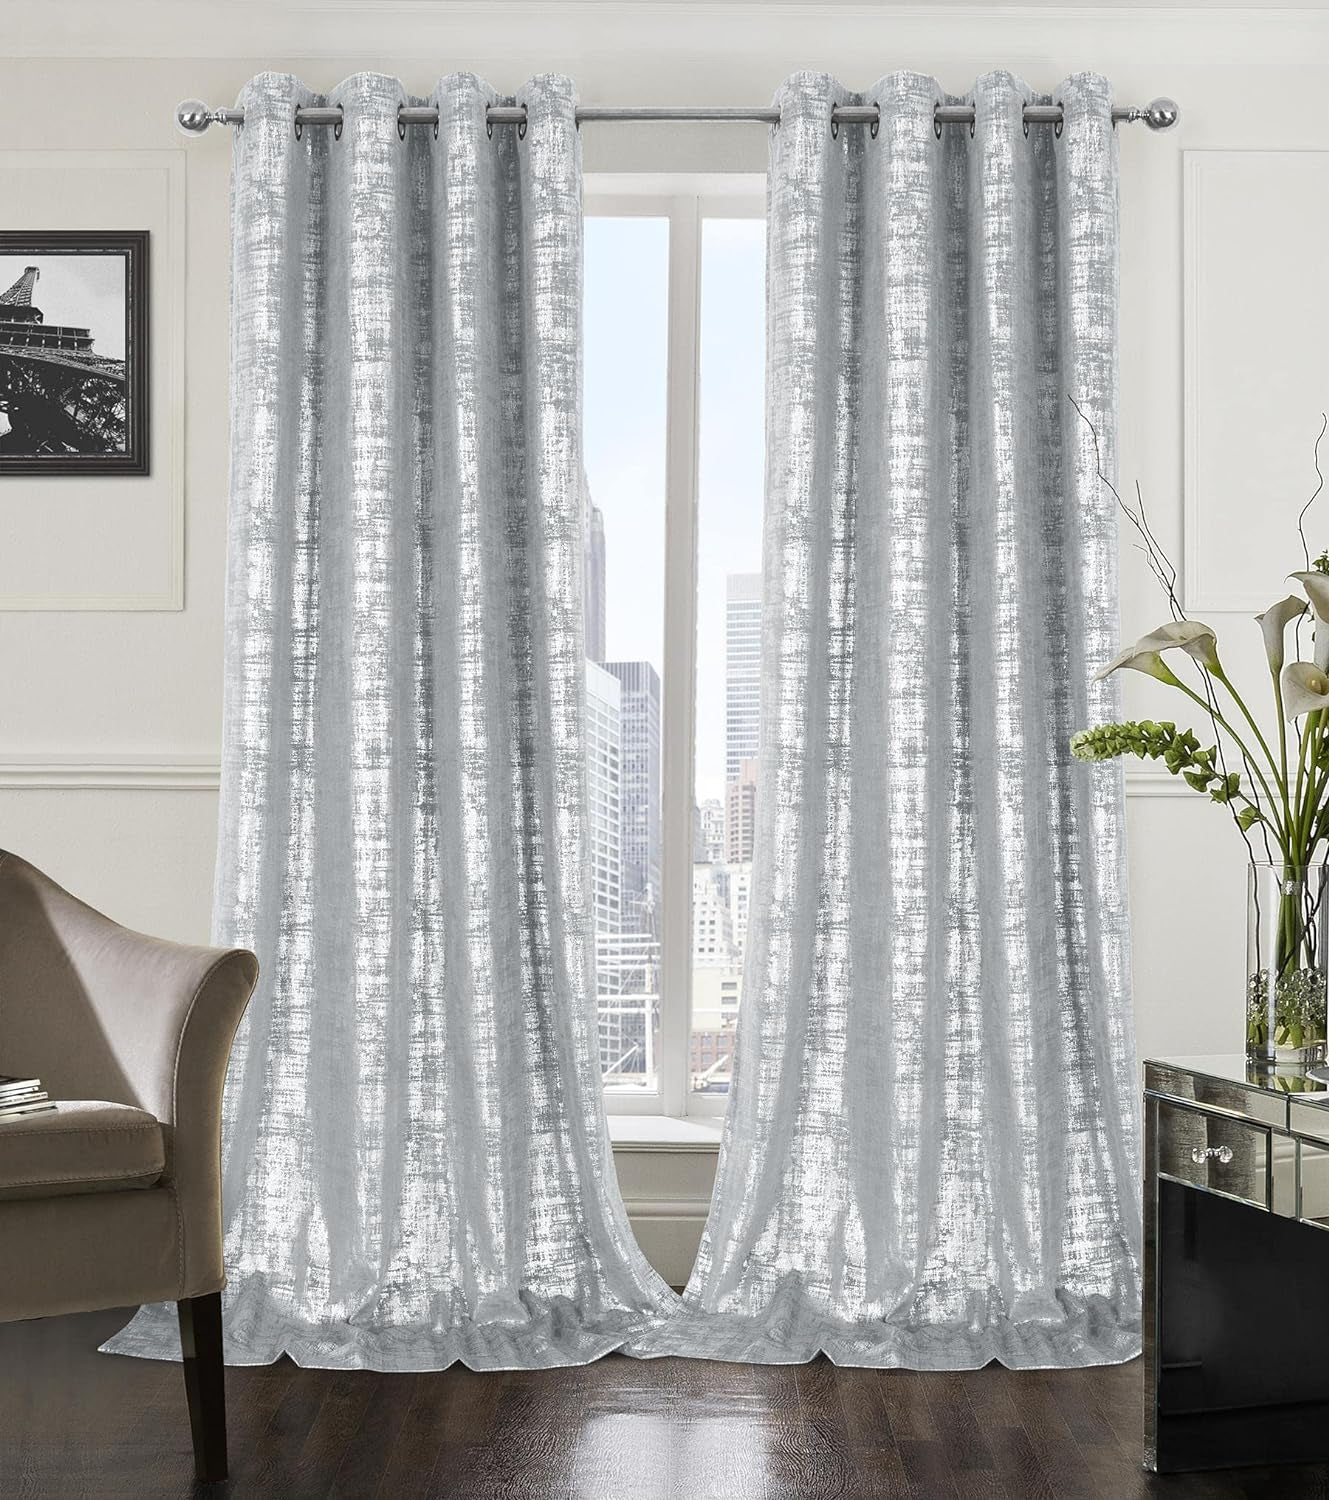 Always4U Soft Velvet Curtains 95 Inch Length Luxury Bedroom Curtains Gold Foil Print Window Curtains for Living Room 1 Panel White  always4u Silver (Silver Print) 2 Panels: 52''W*120''L 